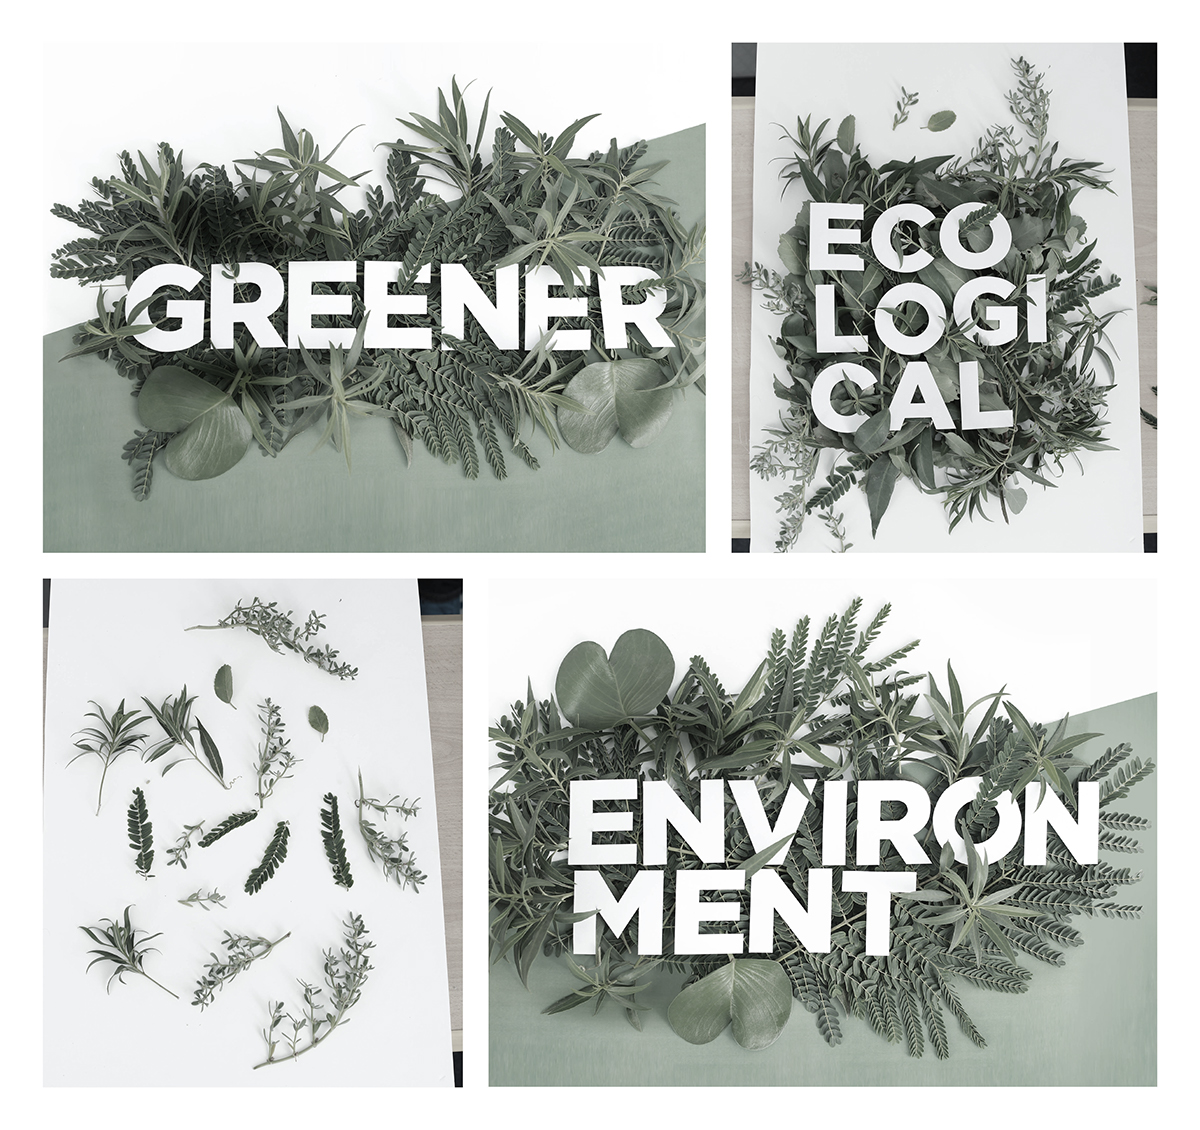 gpic environment annual report Ecology economic growth Sustainability culture Creative Design Layout environmentally friendly design